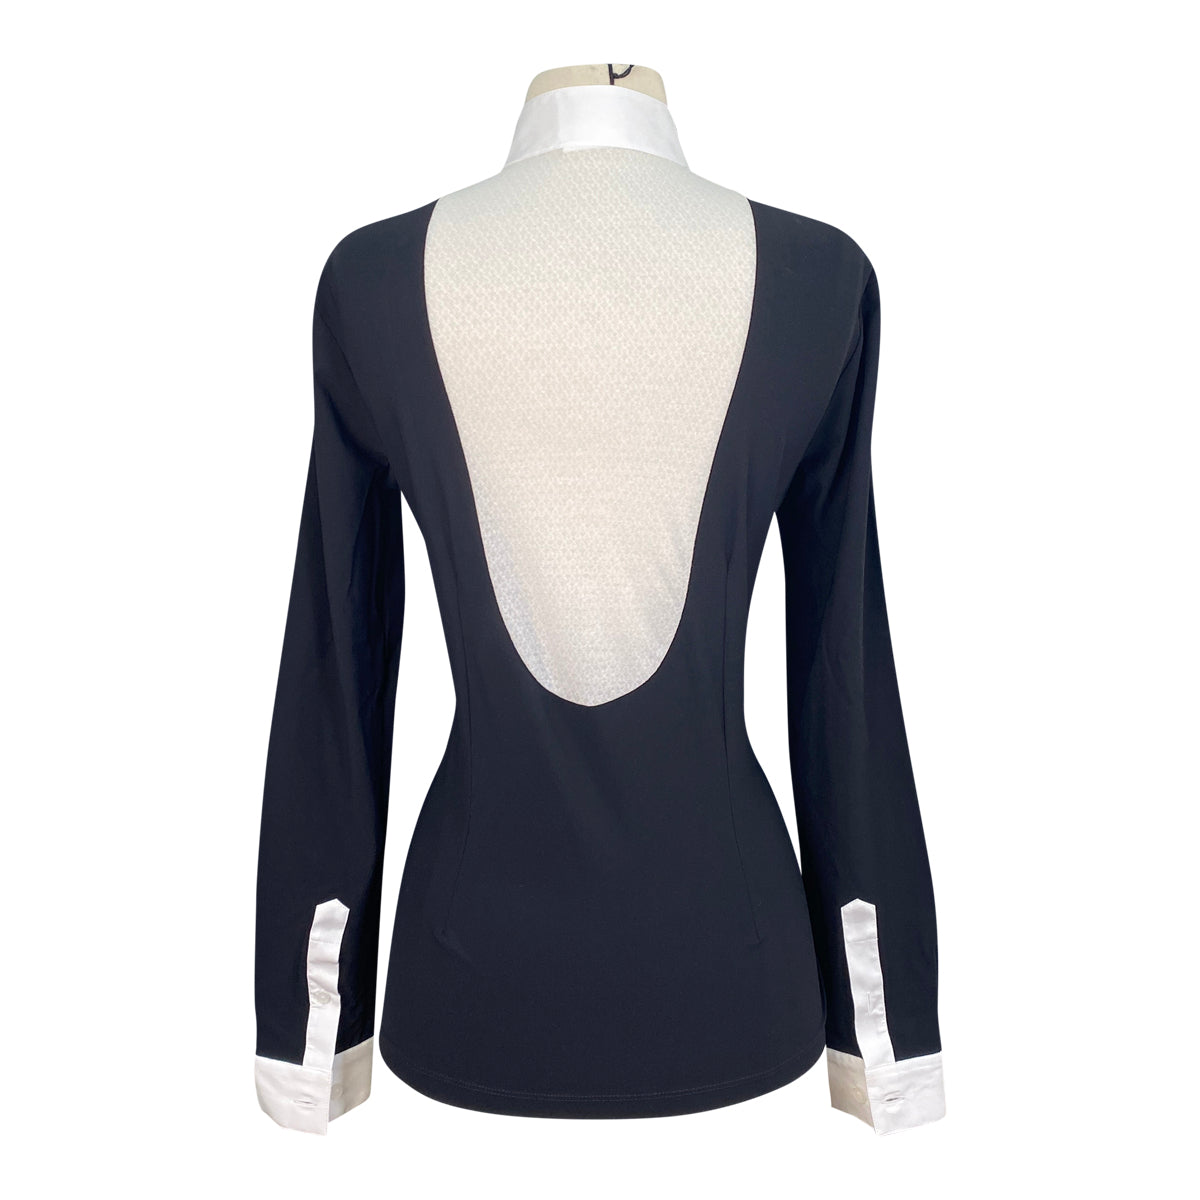 Cavalleria Toscana Lace Drop Bib L/S Competition Shirt in Navy